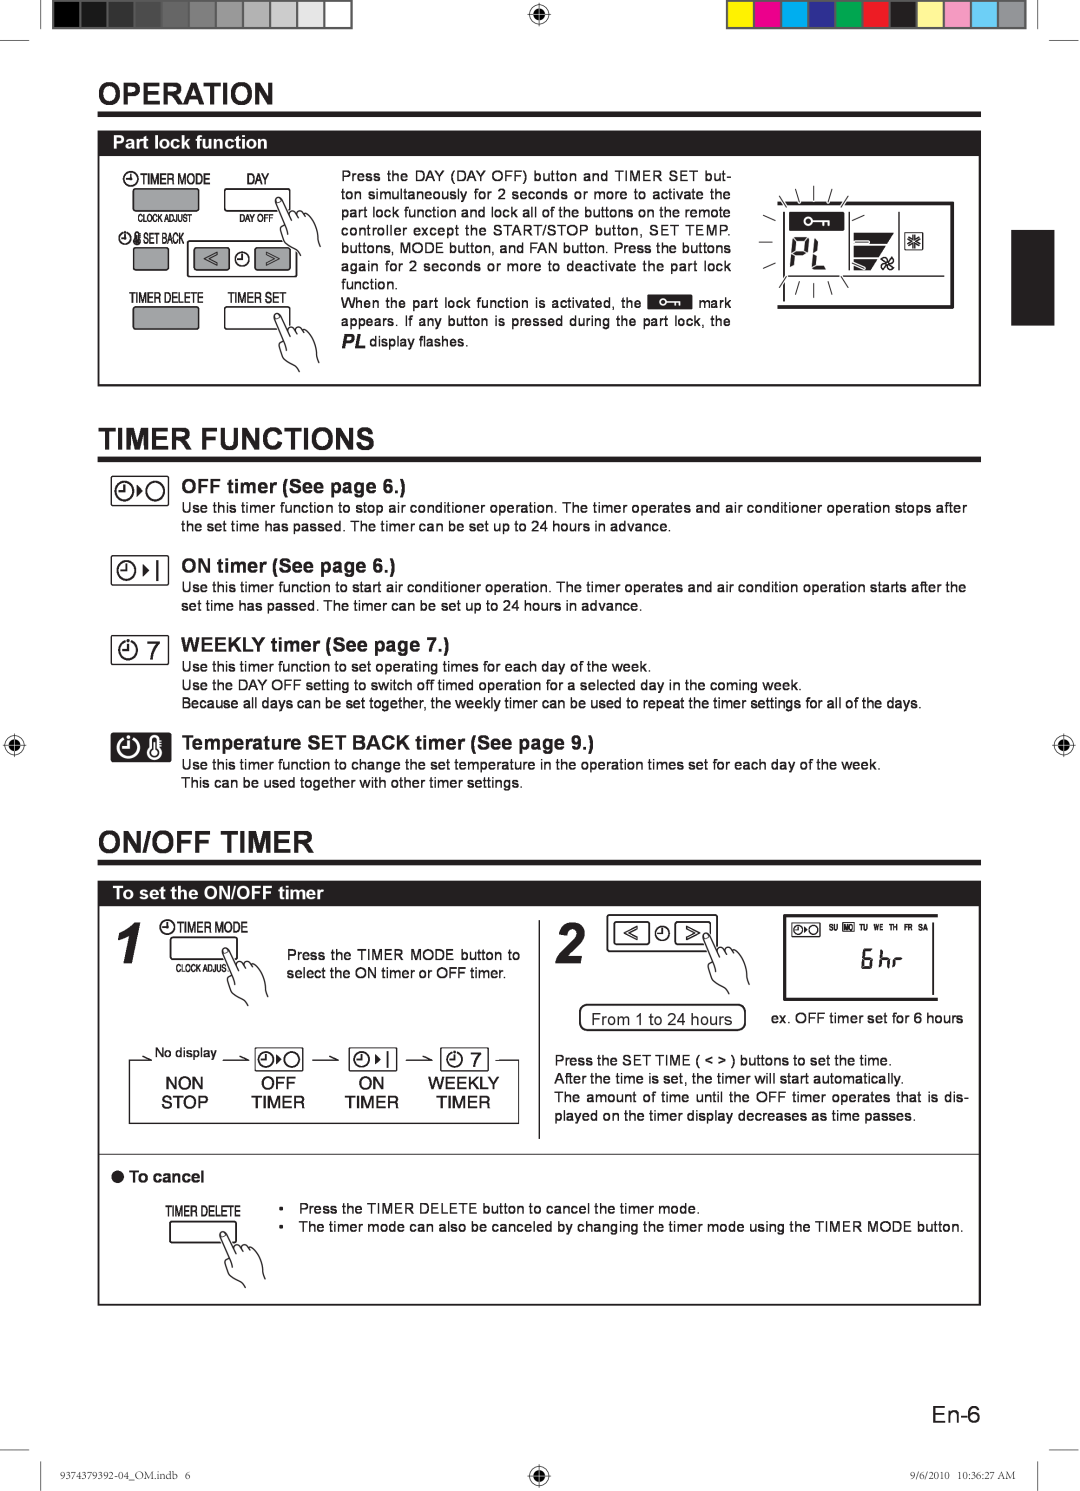 Fujitsu 9374379392-04 Timer Functions, On/Off Timer, En-6, Operation, Part lock function, To set the ON/OFF timer, Weekly 